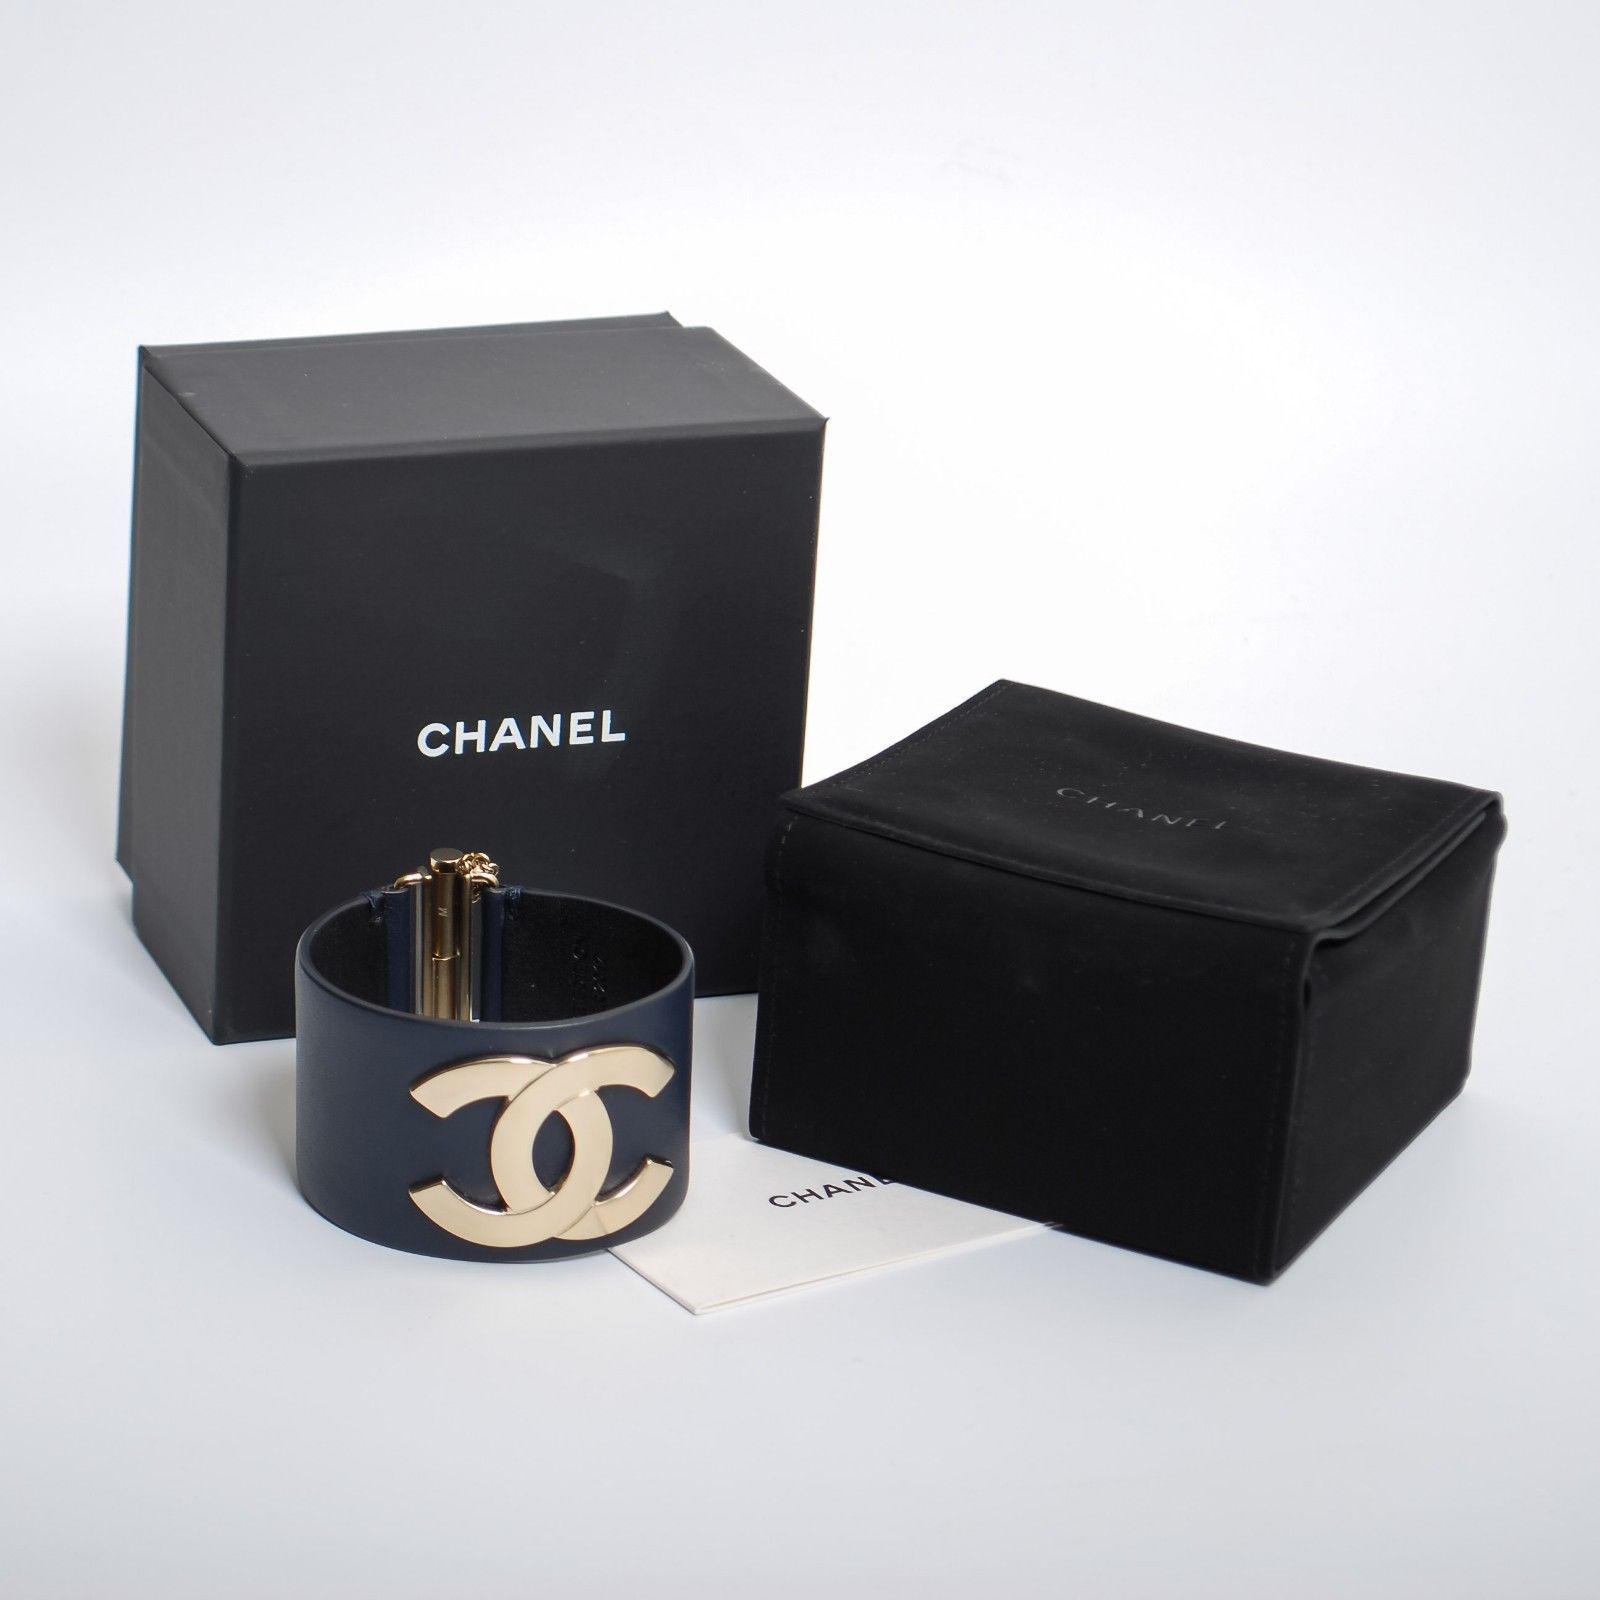 CHANEL Navy Blue Leather Wide Cuff Bracelet CC Logo Gold Tone Metal with Box - $768.40